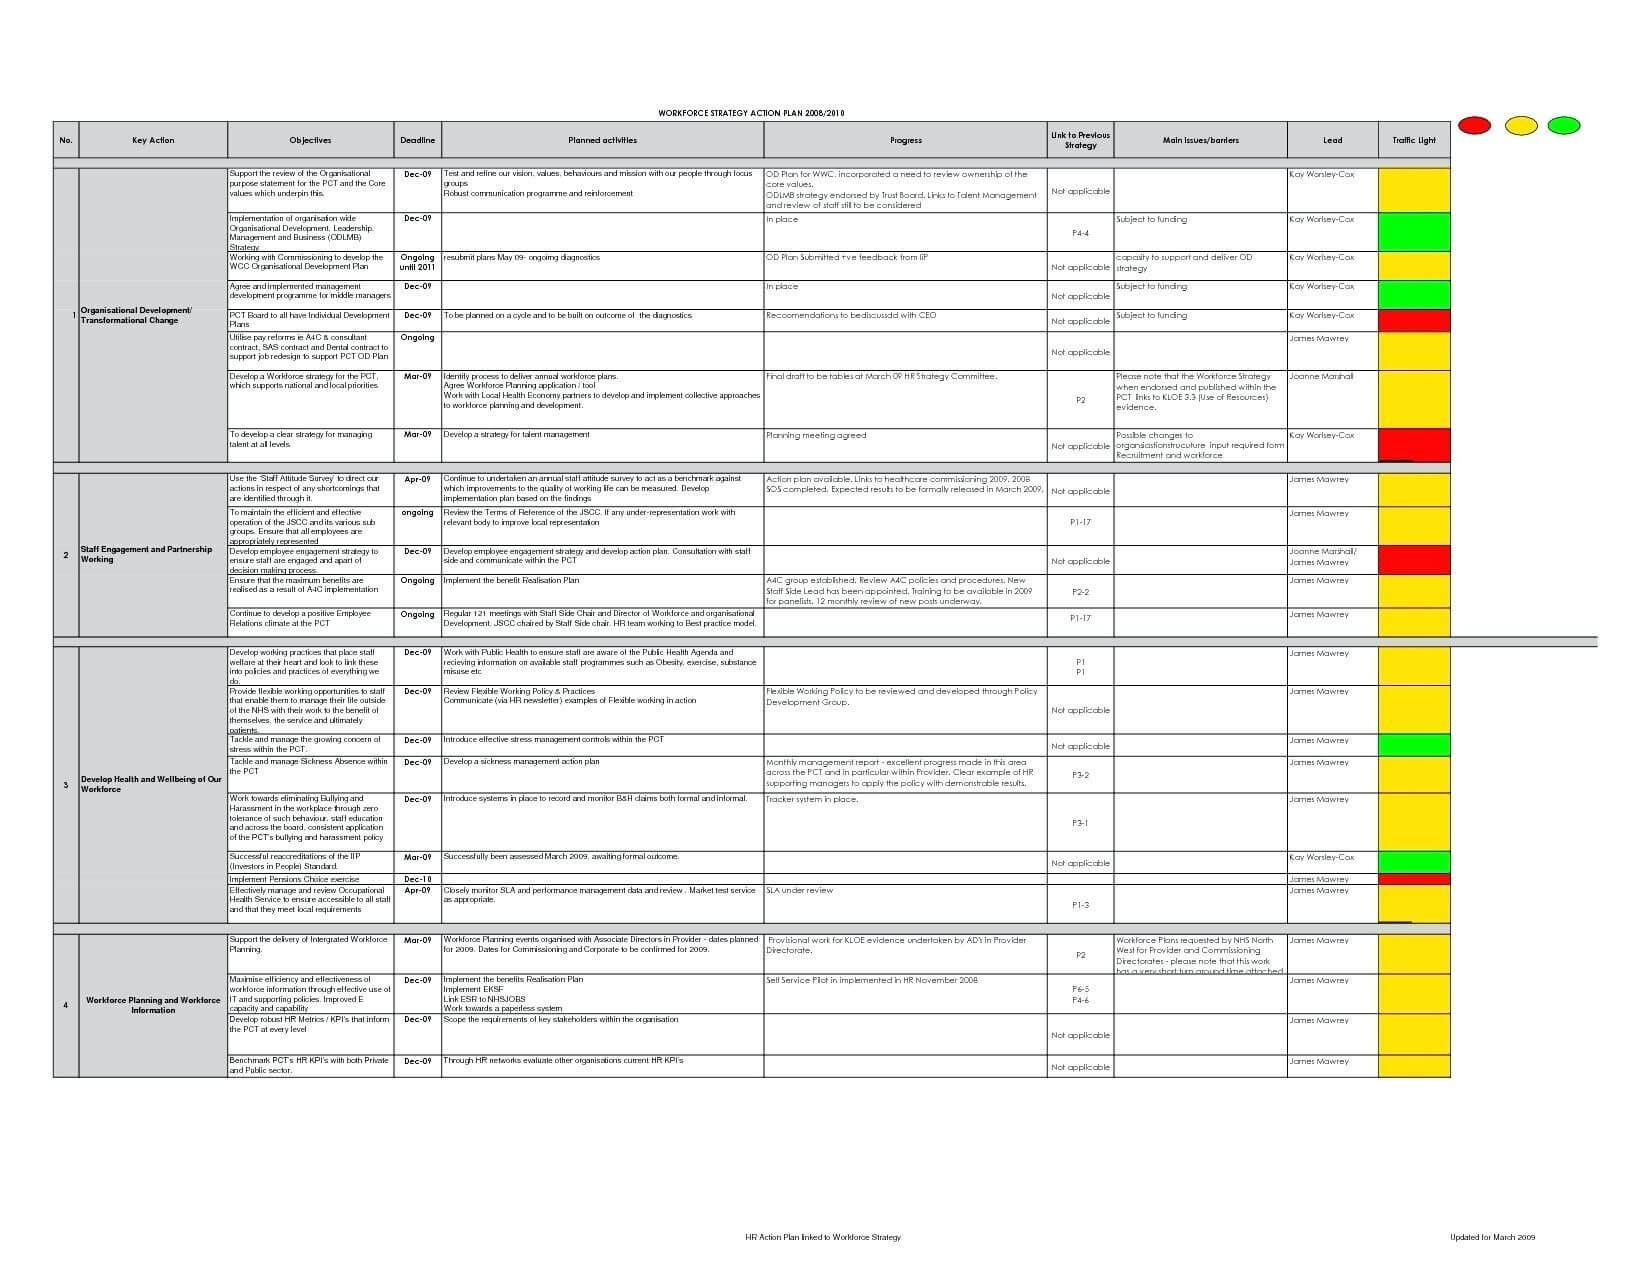 Unique Weekly Task List Template Excel #xls #xlsformat For Implementation Report Template